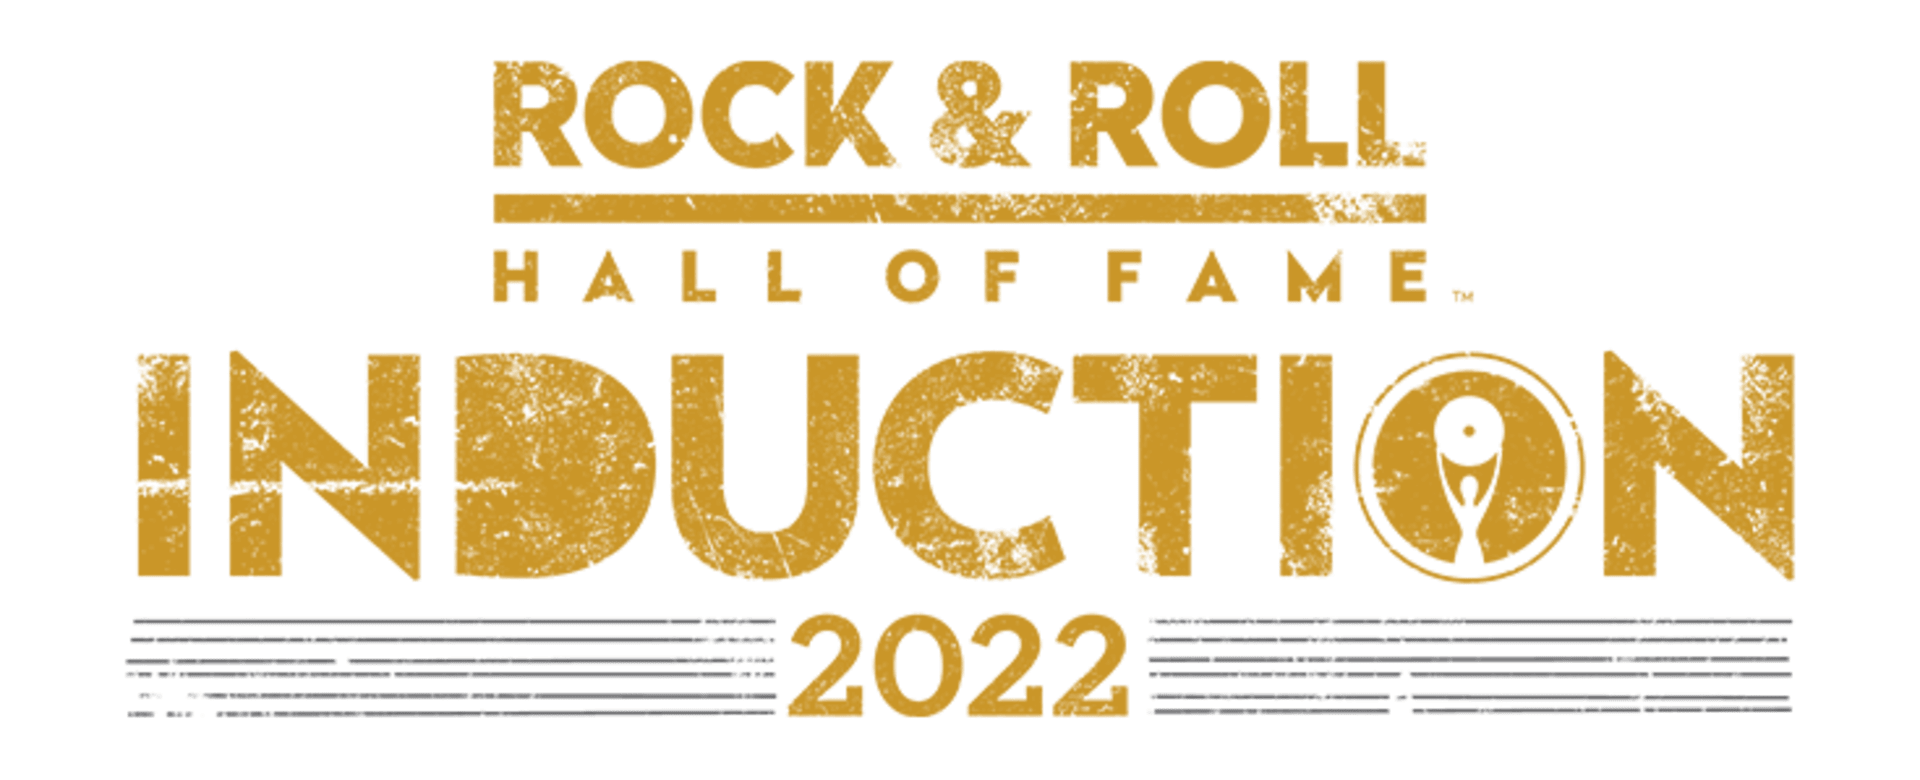 ROCK & ROLL HALL OF FAME FOUNDATION ANNOUNCES NOMINEES FOR 2022 INDUCTION